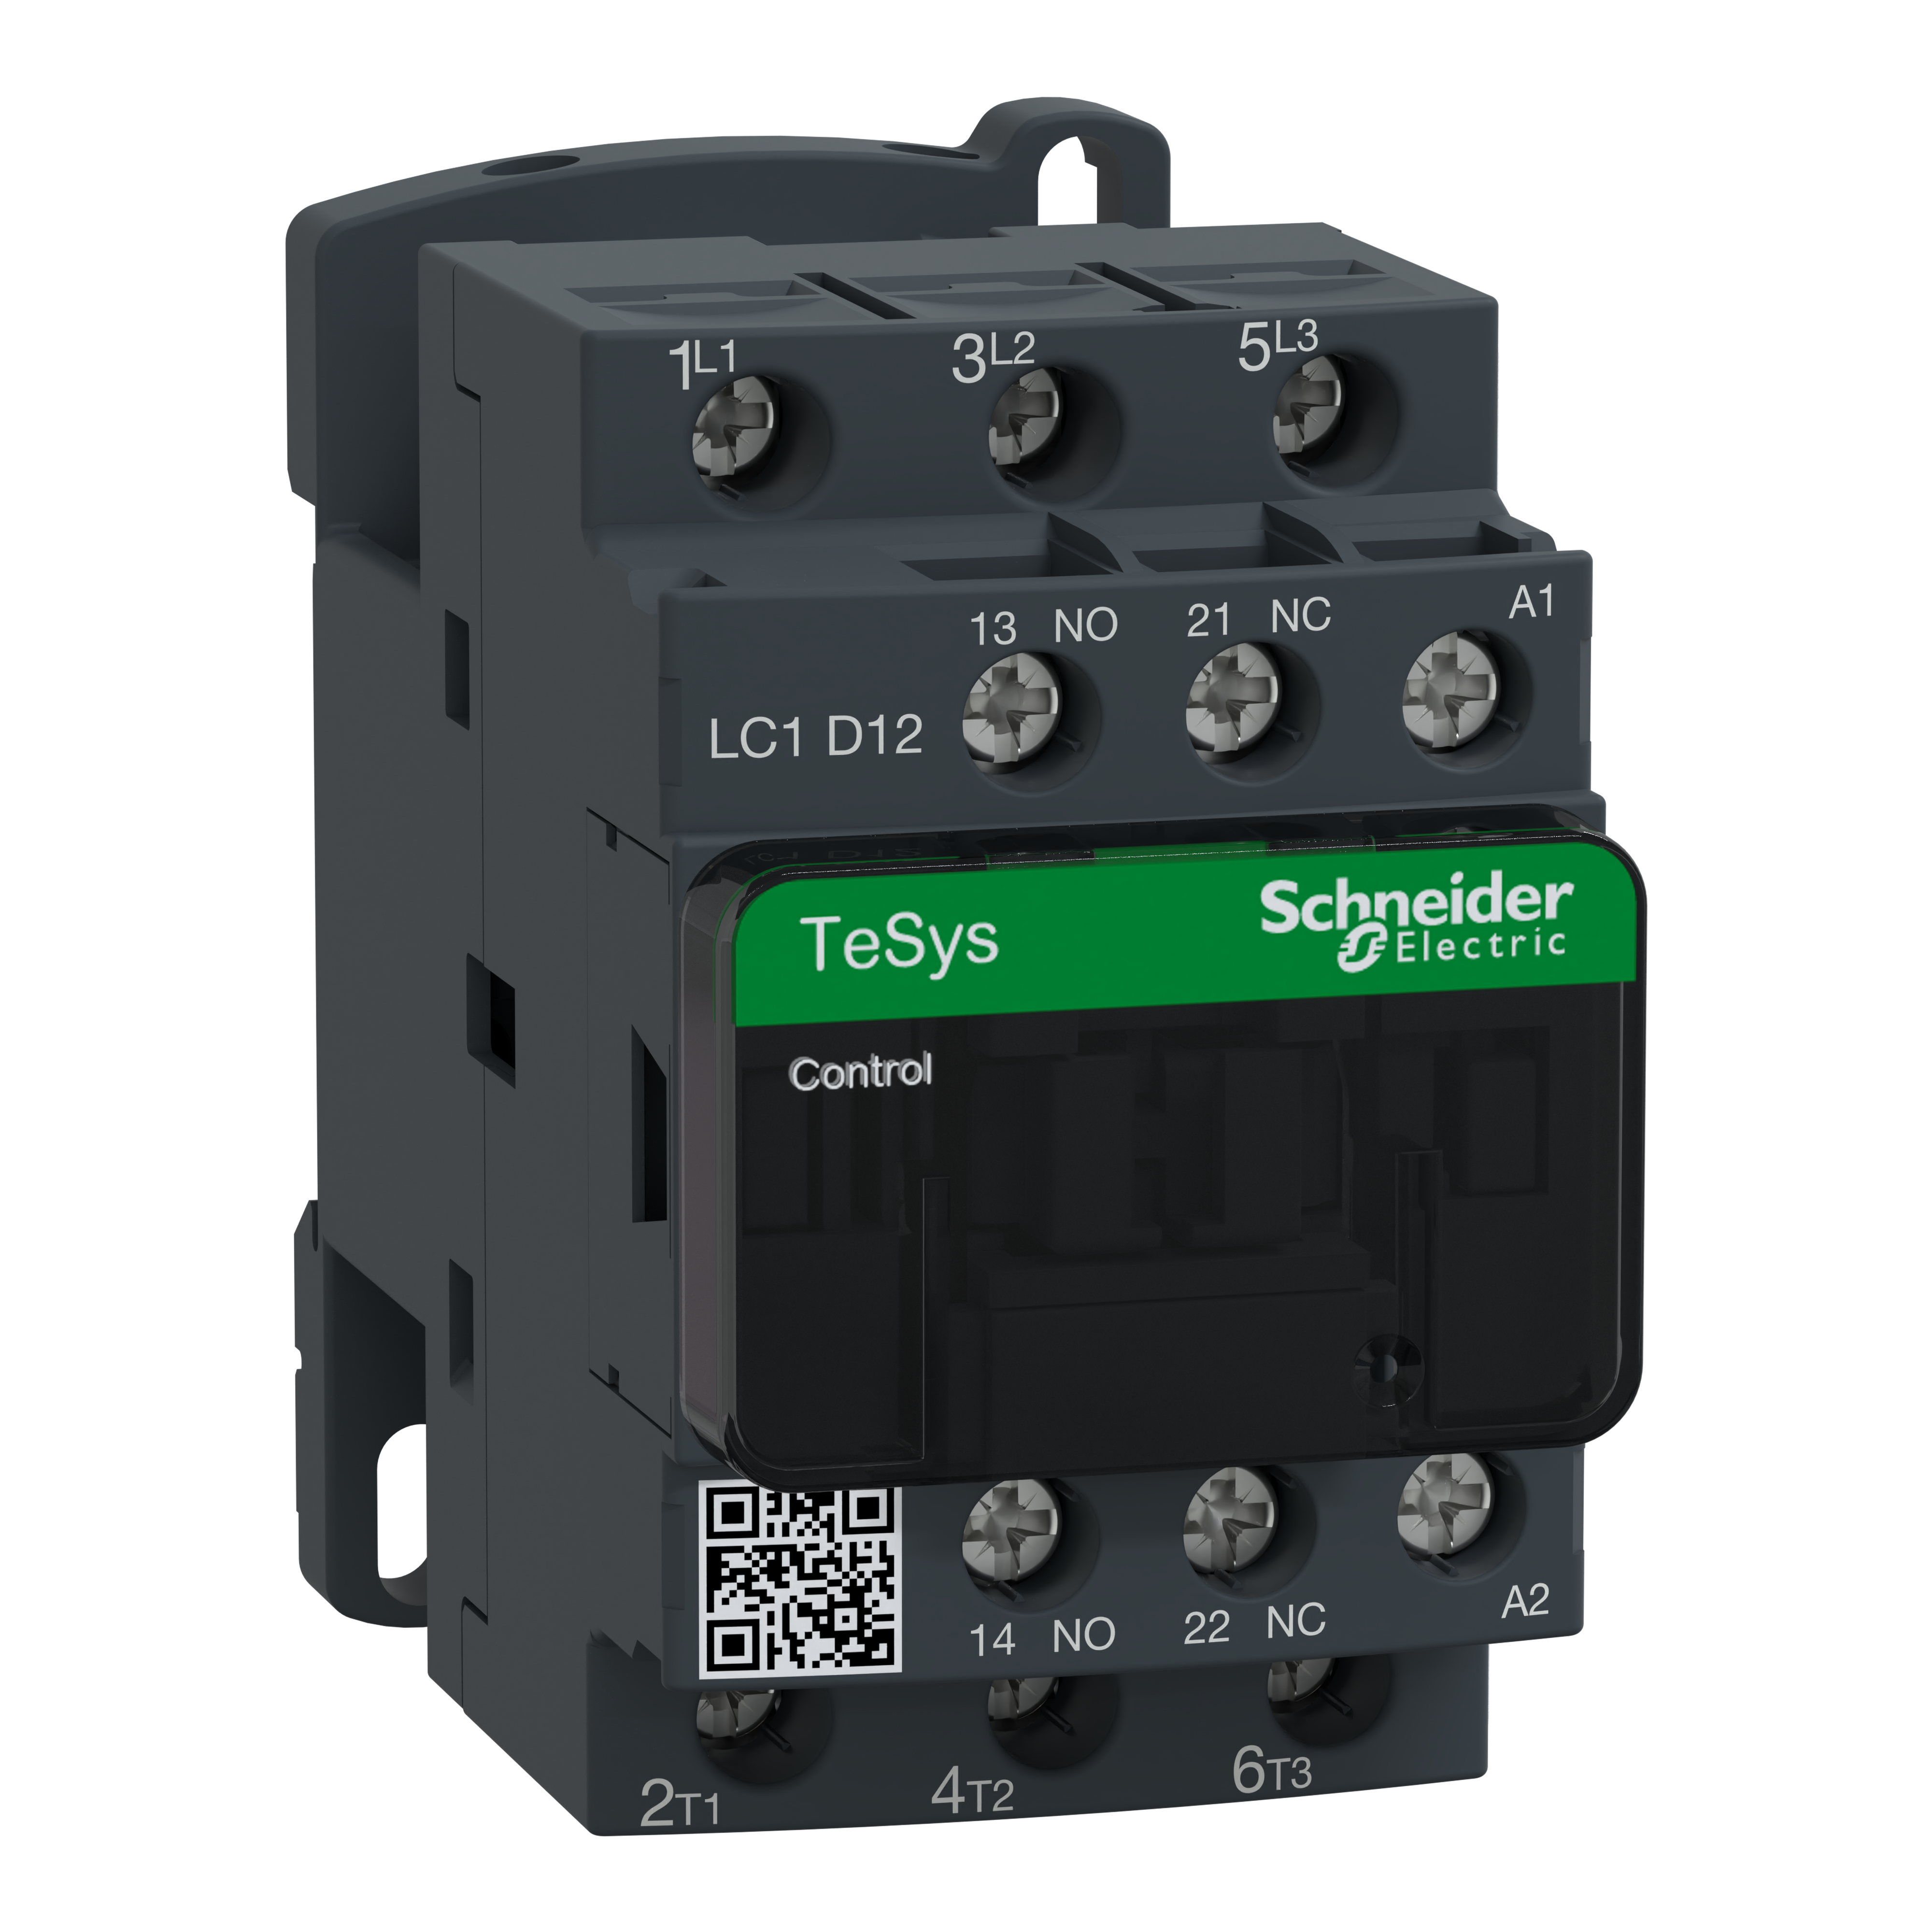 IEC contactor, TeSys Deca, nonreversing, 12A, 7.5HP at 480VAC, up to 100kA SCCR, 3 phase, 3 NO, 120VAC 50/60Hz coil, open